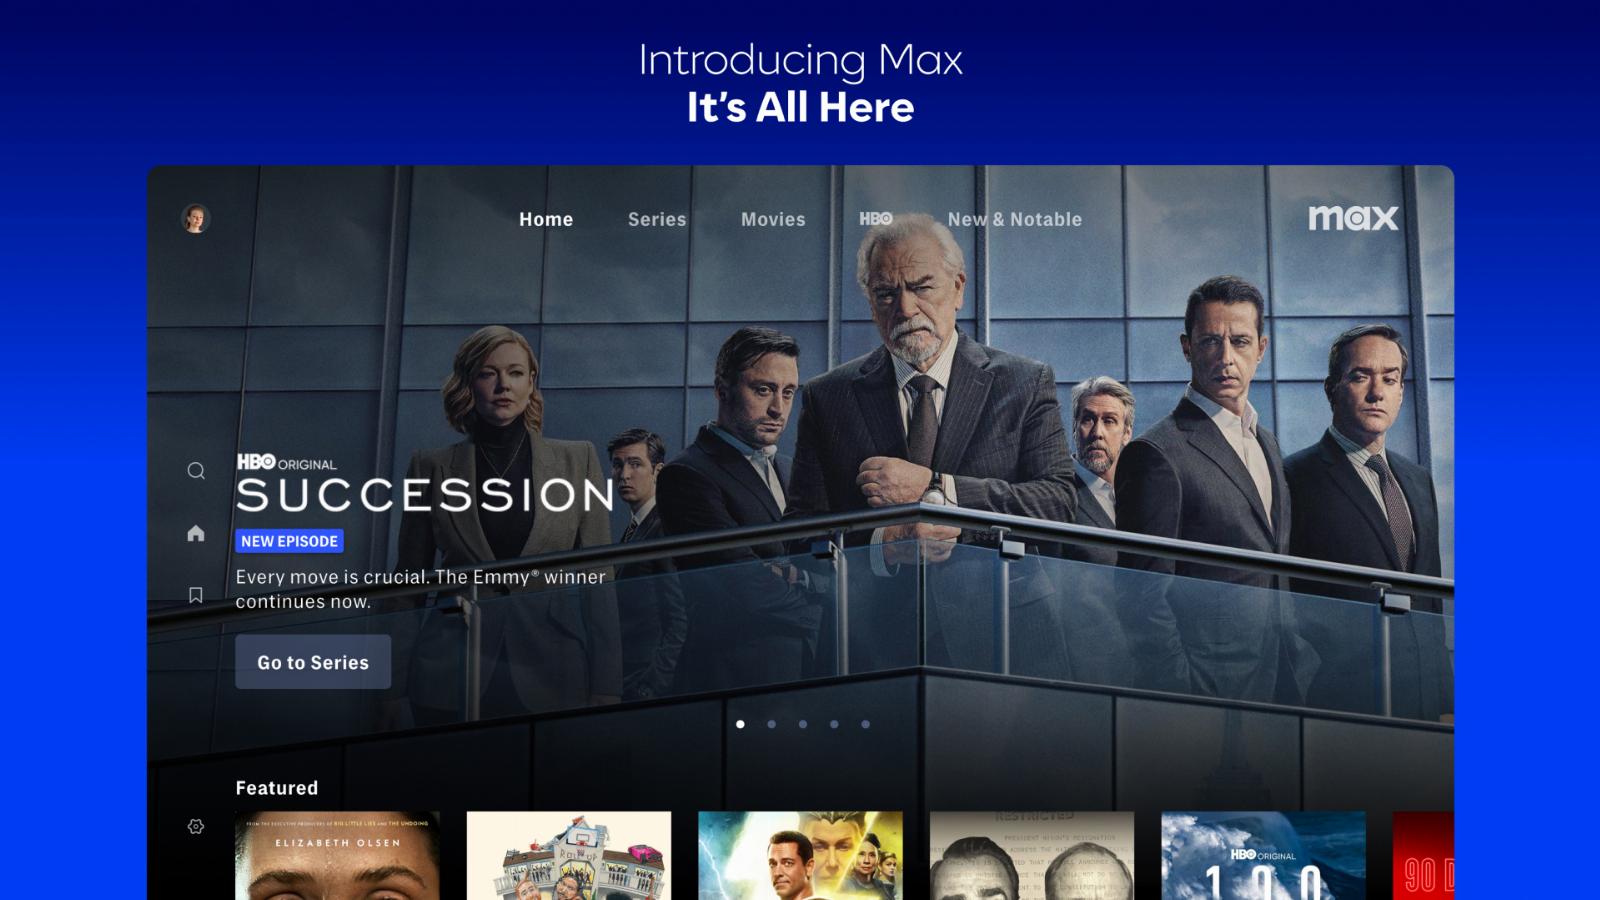 Max makes its debut in the U.S. to give subscribers 35K hours of content